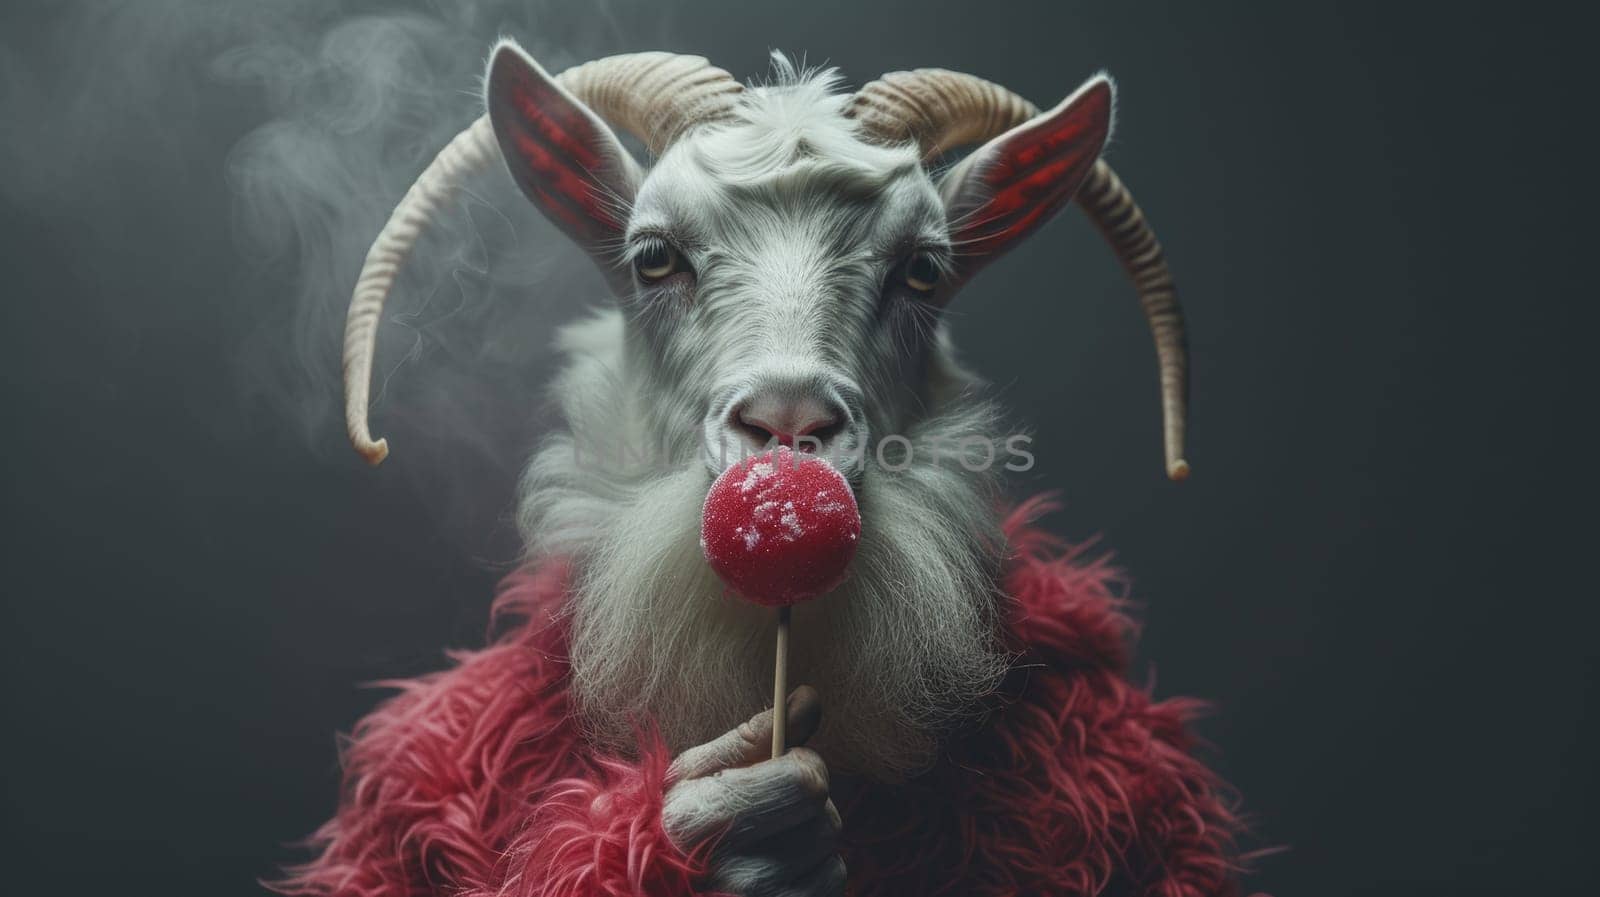 A goat wearing a red sweater and holding up a lollipop, AI by starush